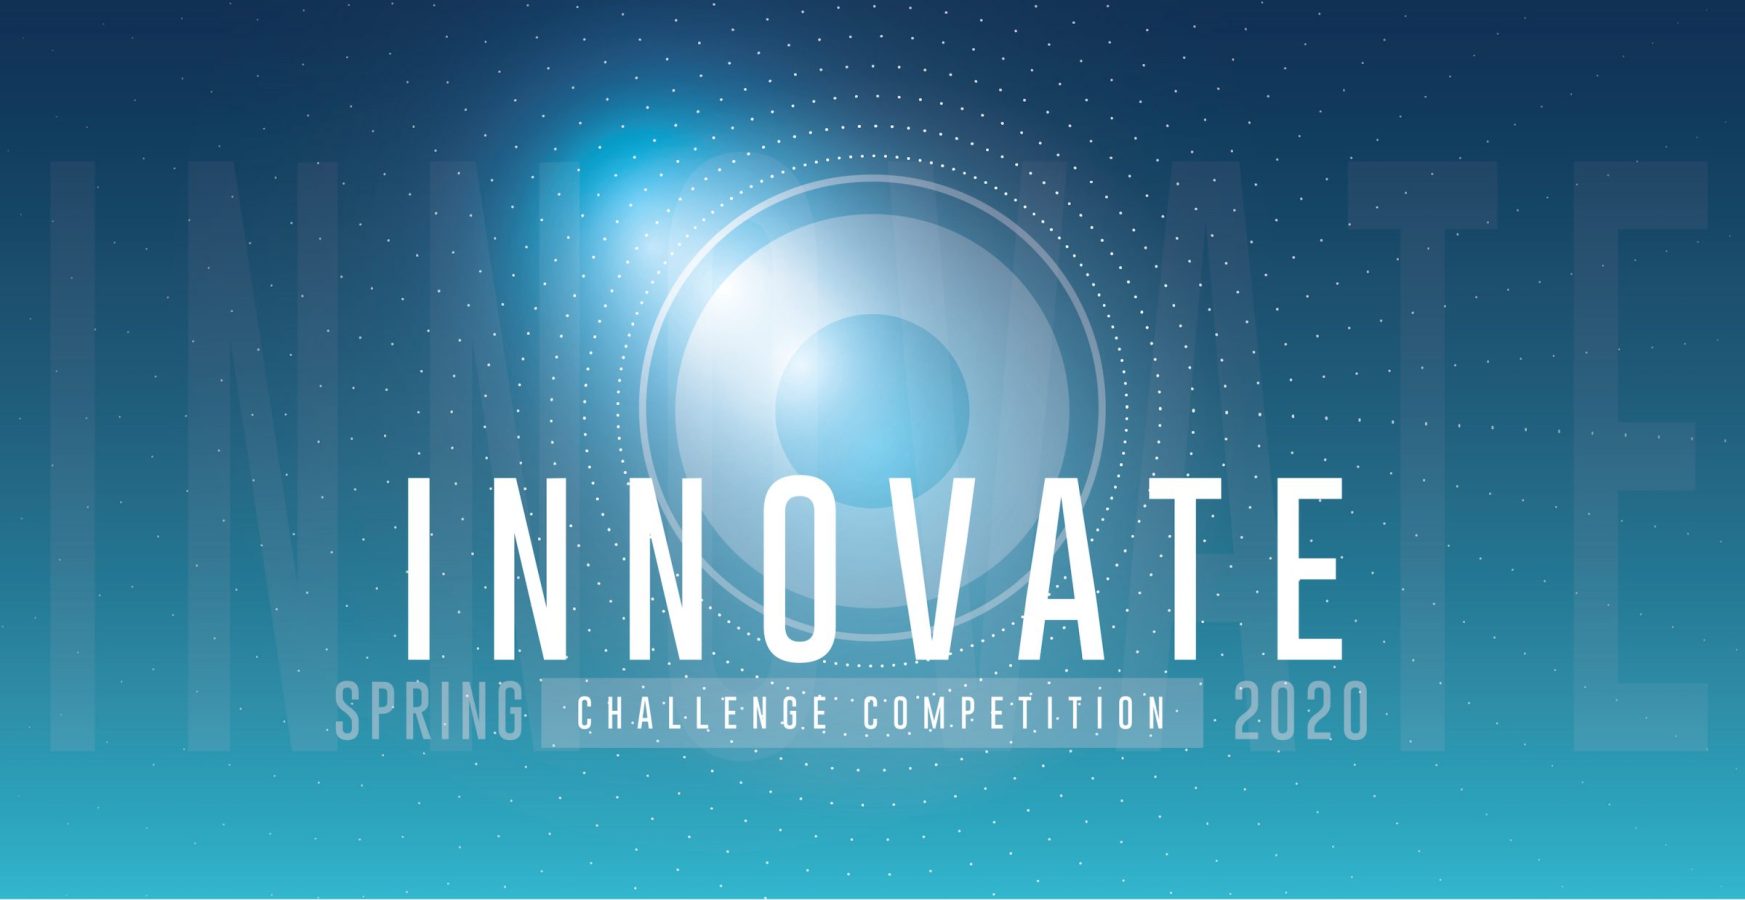 Registration open for new innovation challenge competition